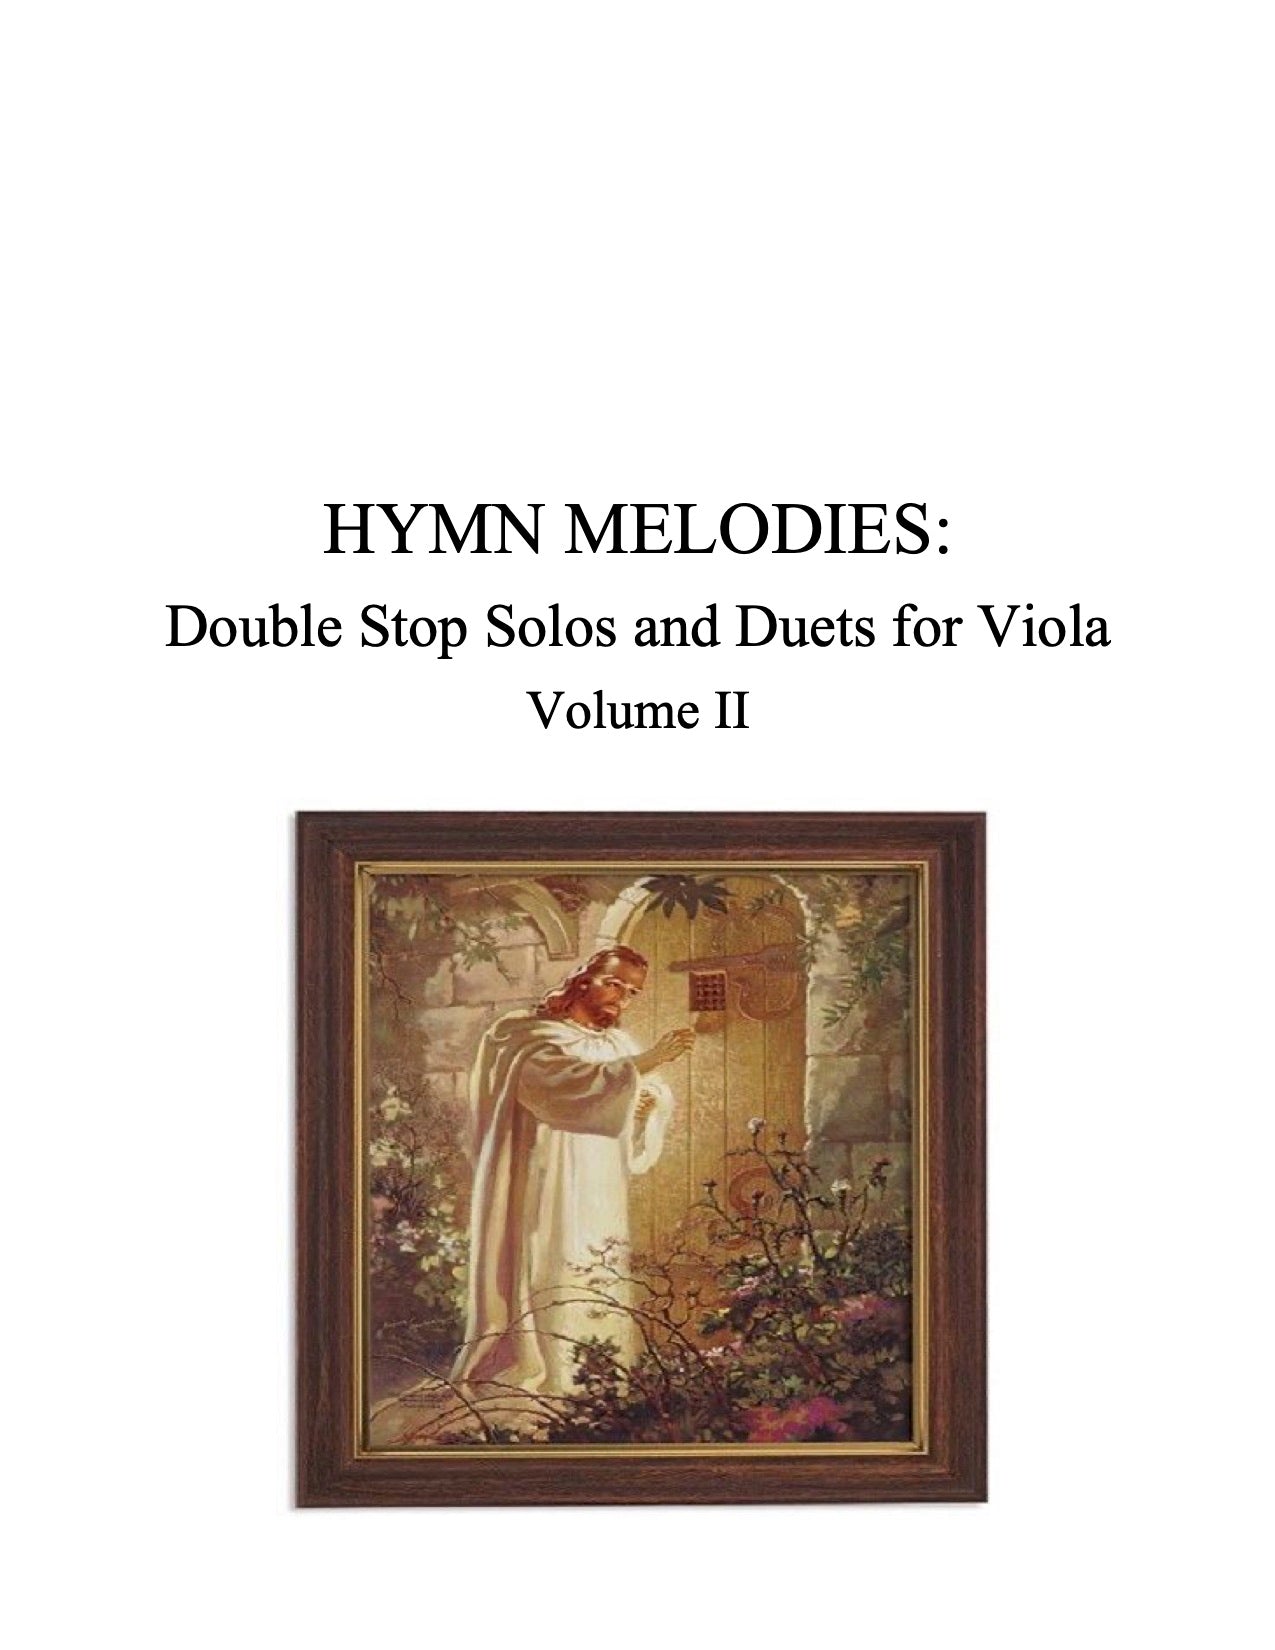 073 - Hymn Melodies: Double Stop Solos and Duets For Viola, Volume II